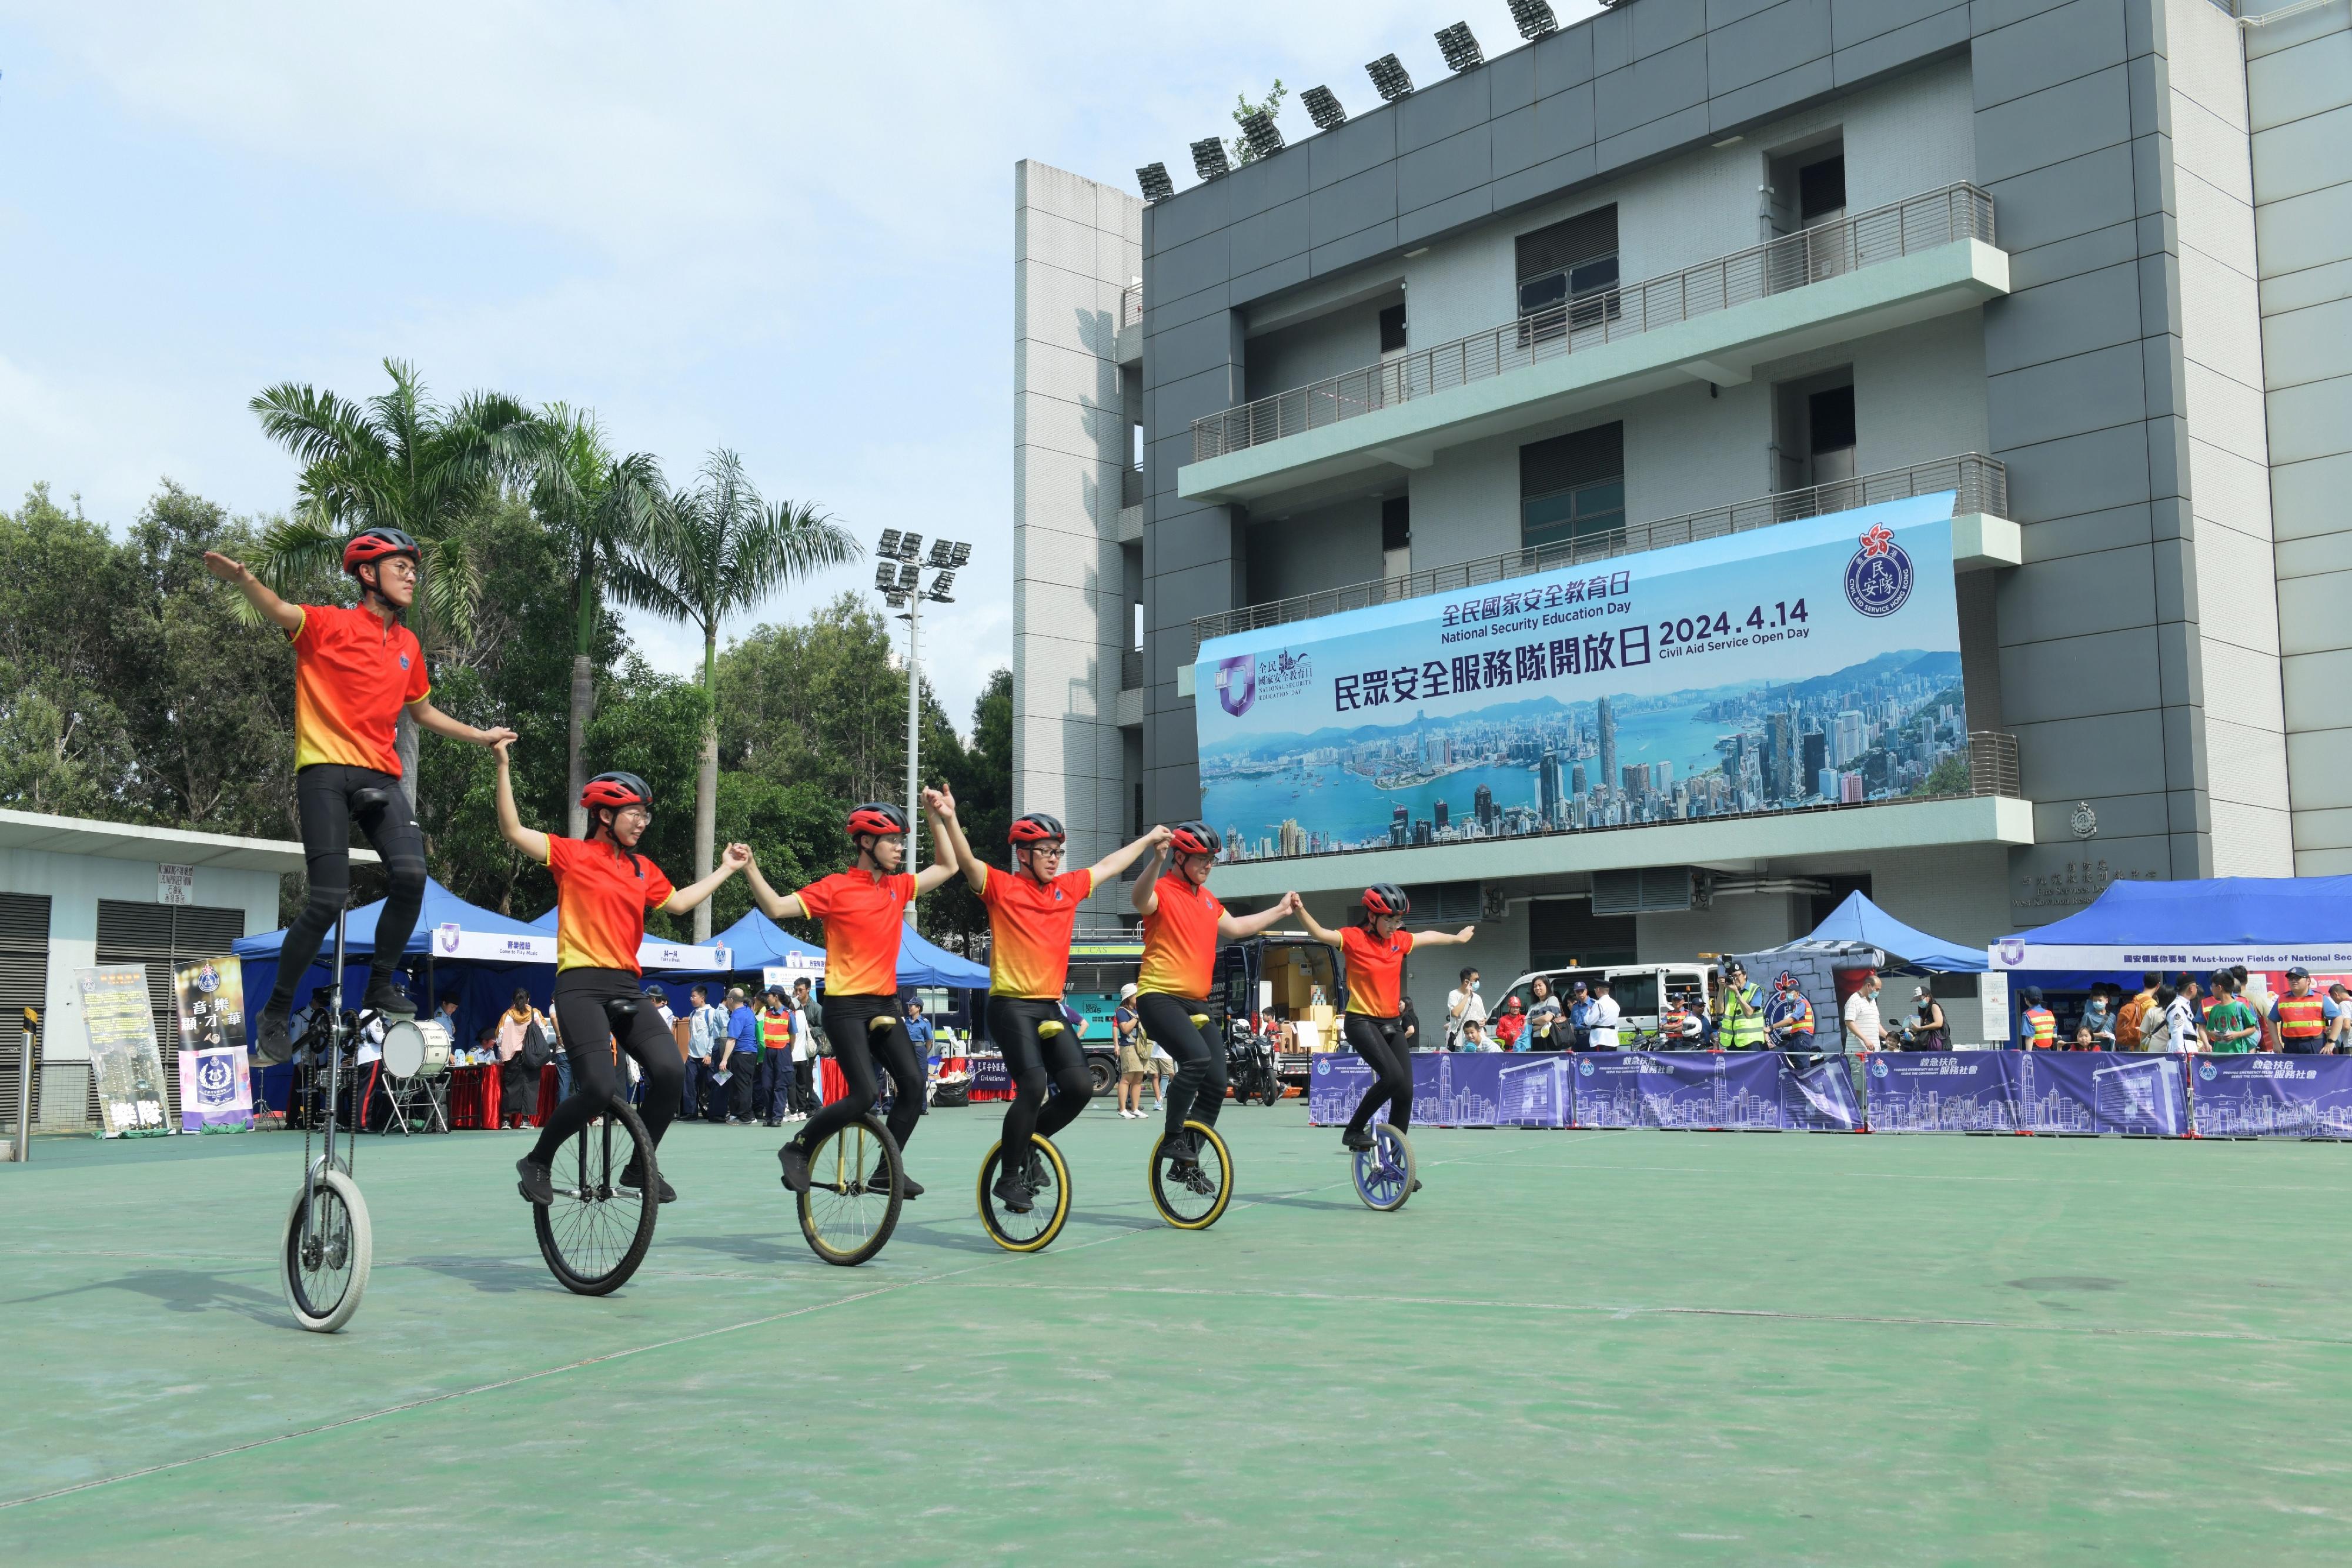 The Civil Aid Service (CAS) held an open day at its headquarters today (April 14) to promote the National Security Education Day. Photo shows bicycle performance from CAS Cadet Corps.